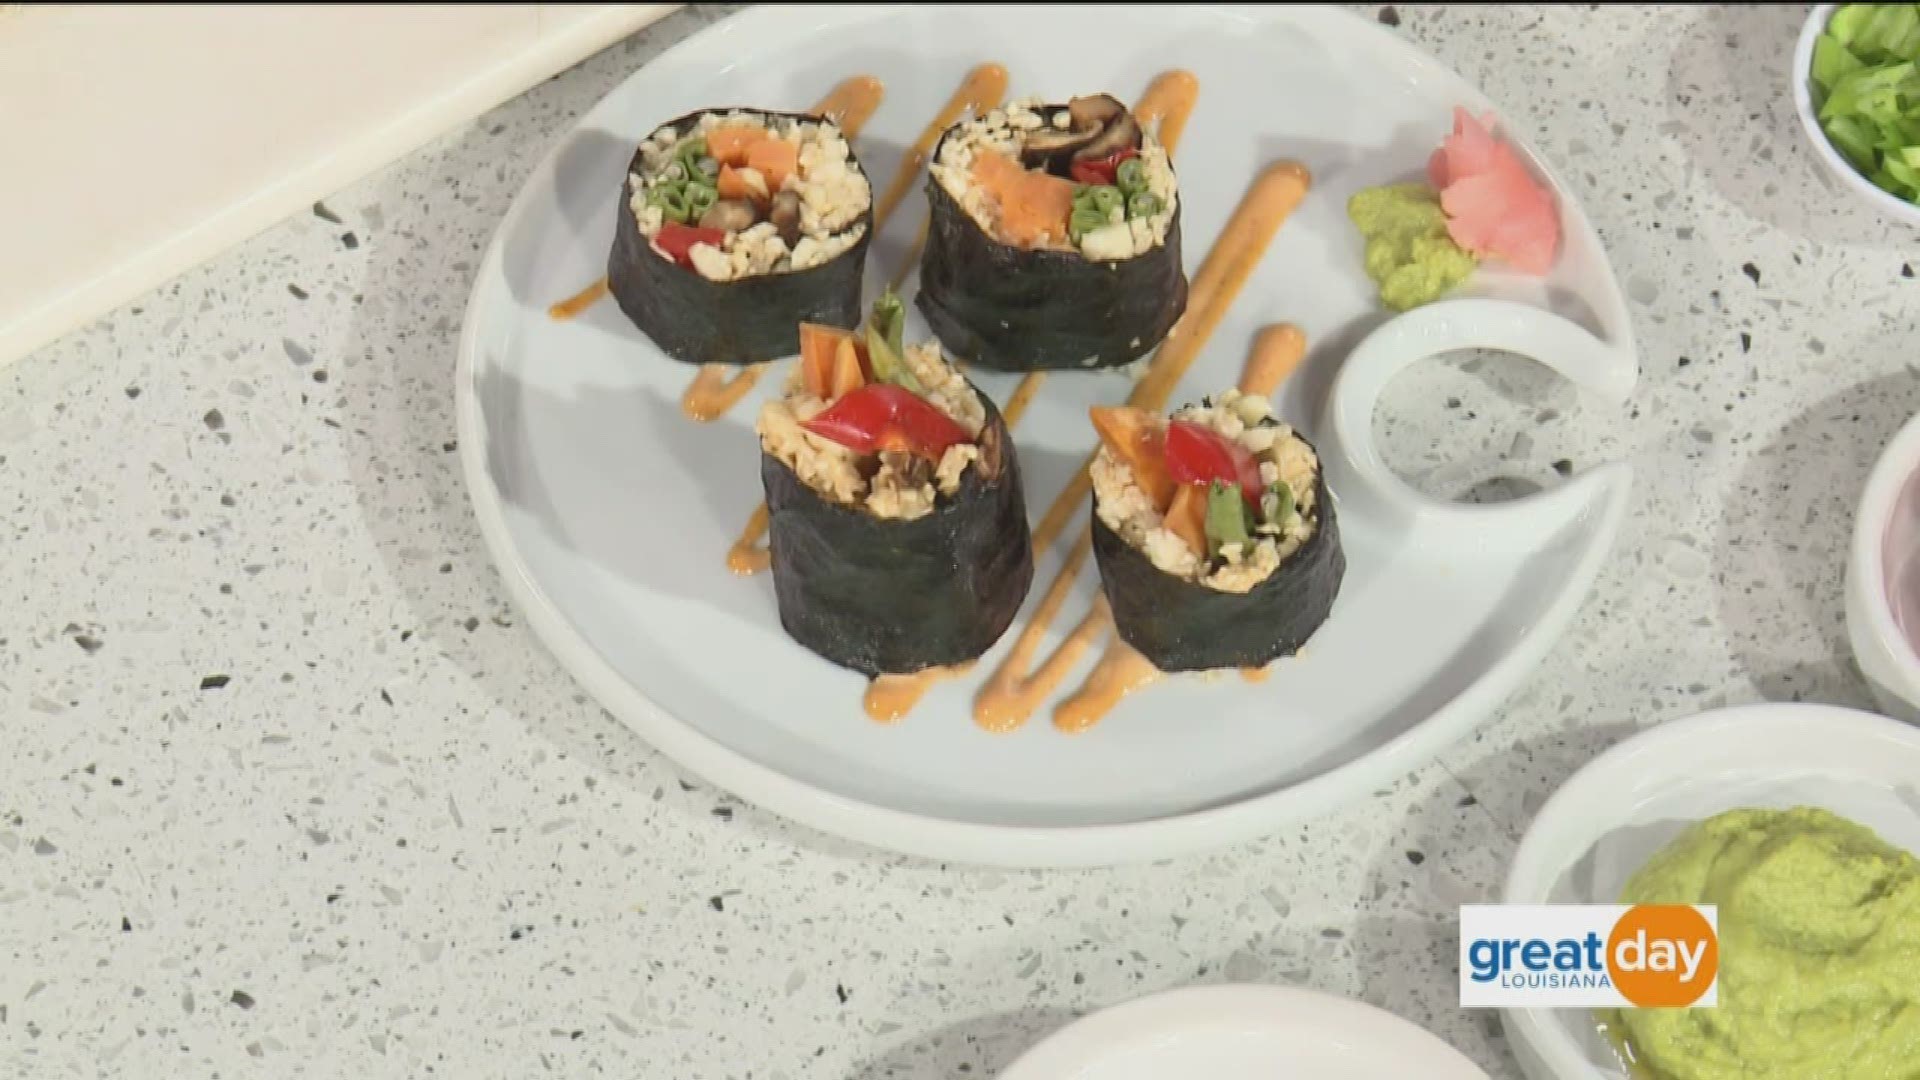 Kinoko is a vegan sushi pop-up that's finding creative ways to provide vegan options with delicious flair. Showing us how it's done is Kinoko owner Kelseay Dukae.